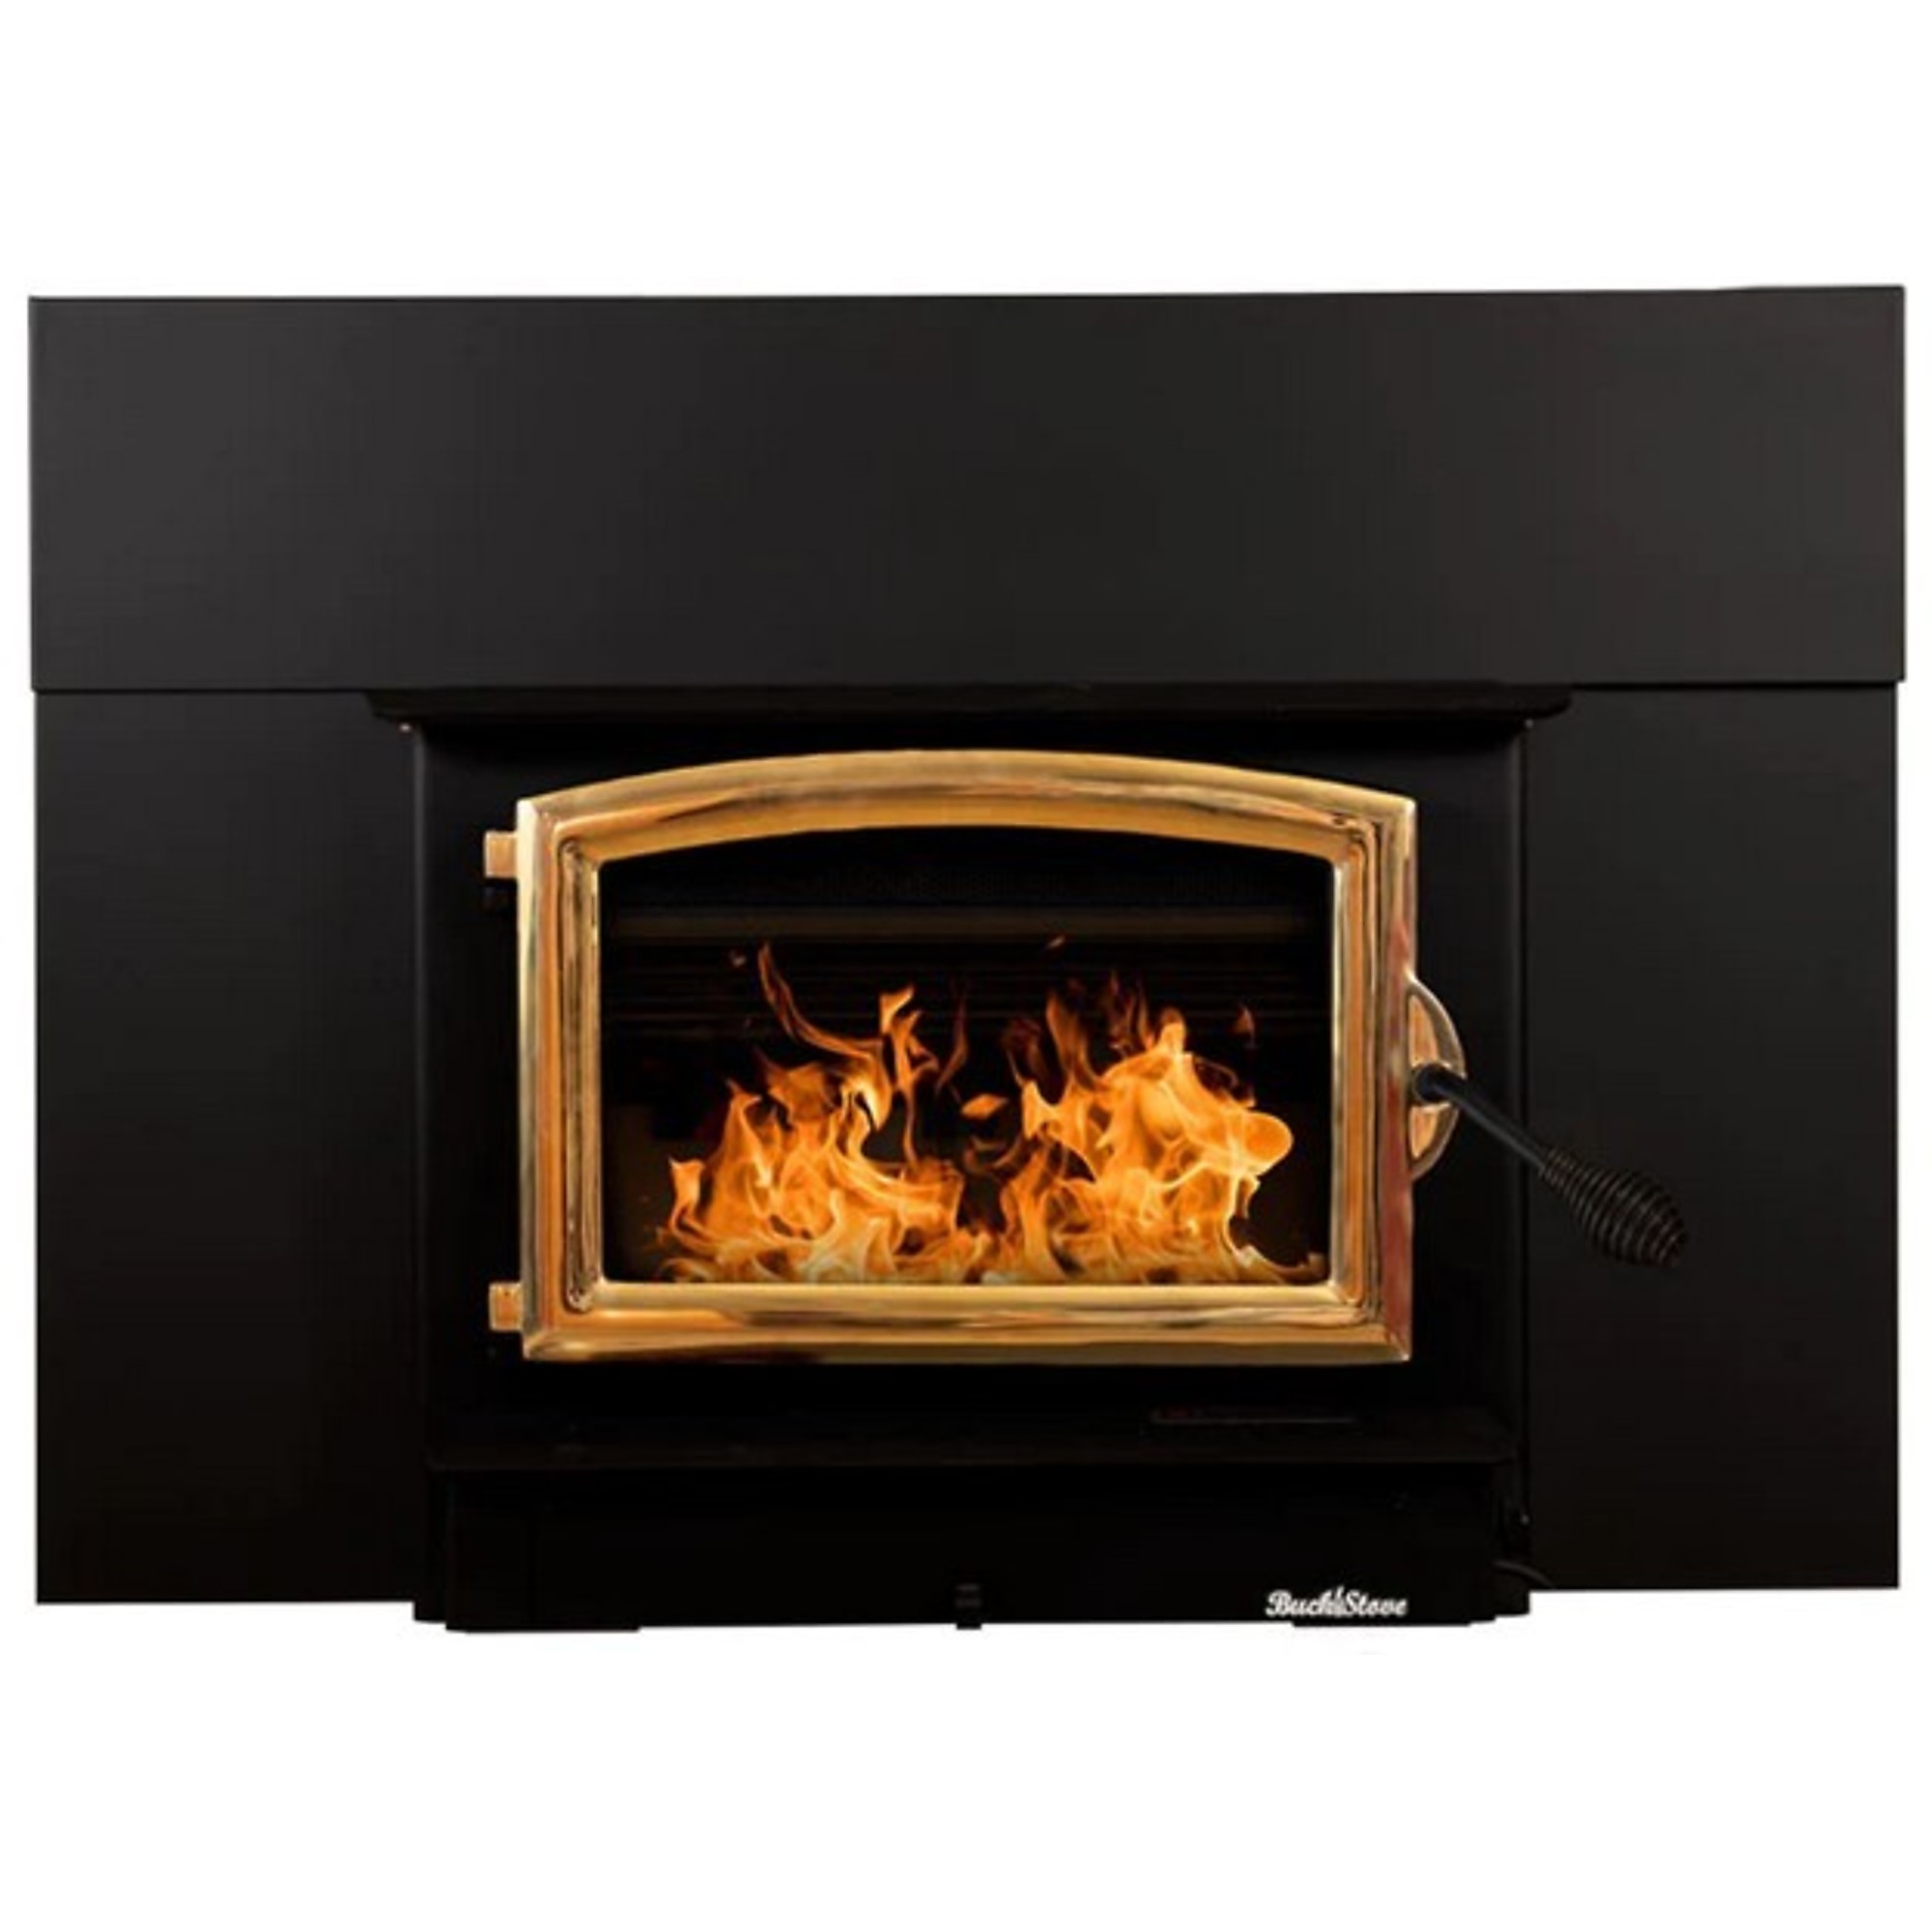 Buck, Wood Burning Insert with Gold Door and Blower, Heat Output 52400 Btu/hour, Heating Capability 2600 ftÂ², Model FP 74GSI